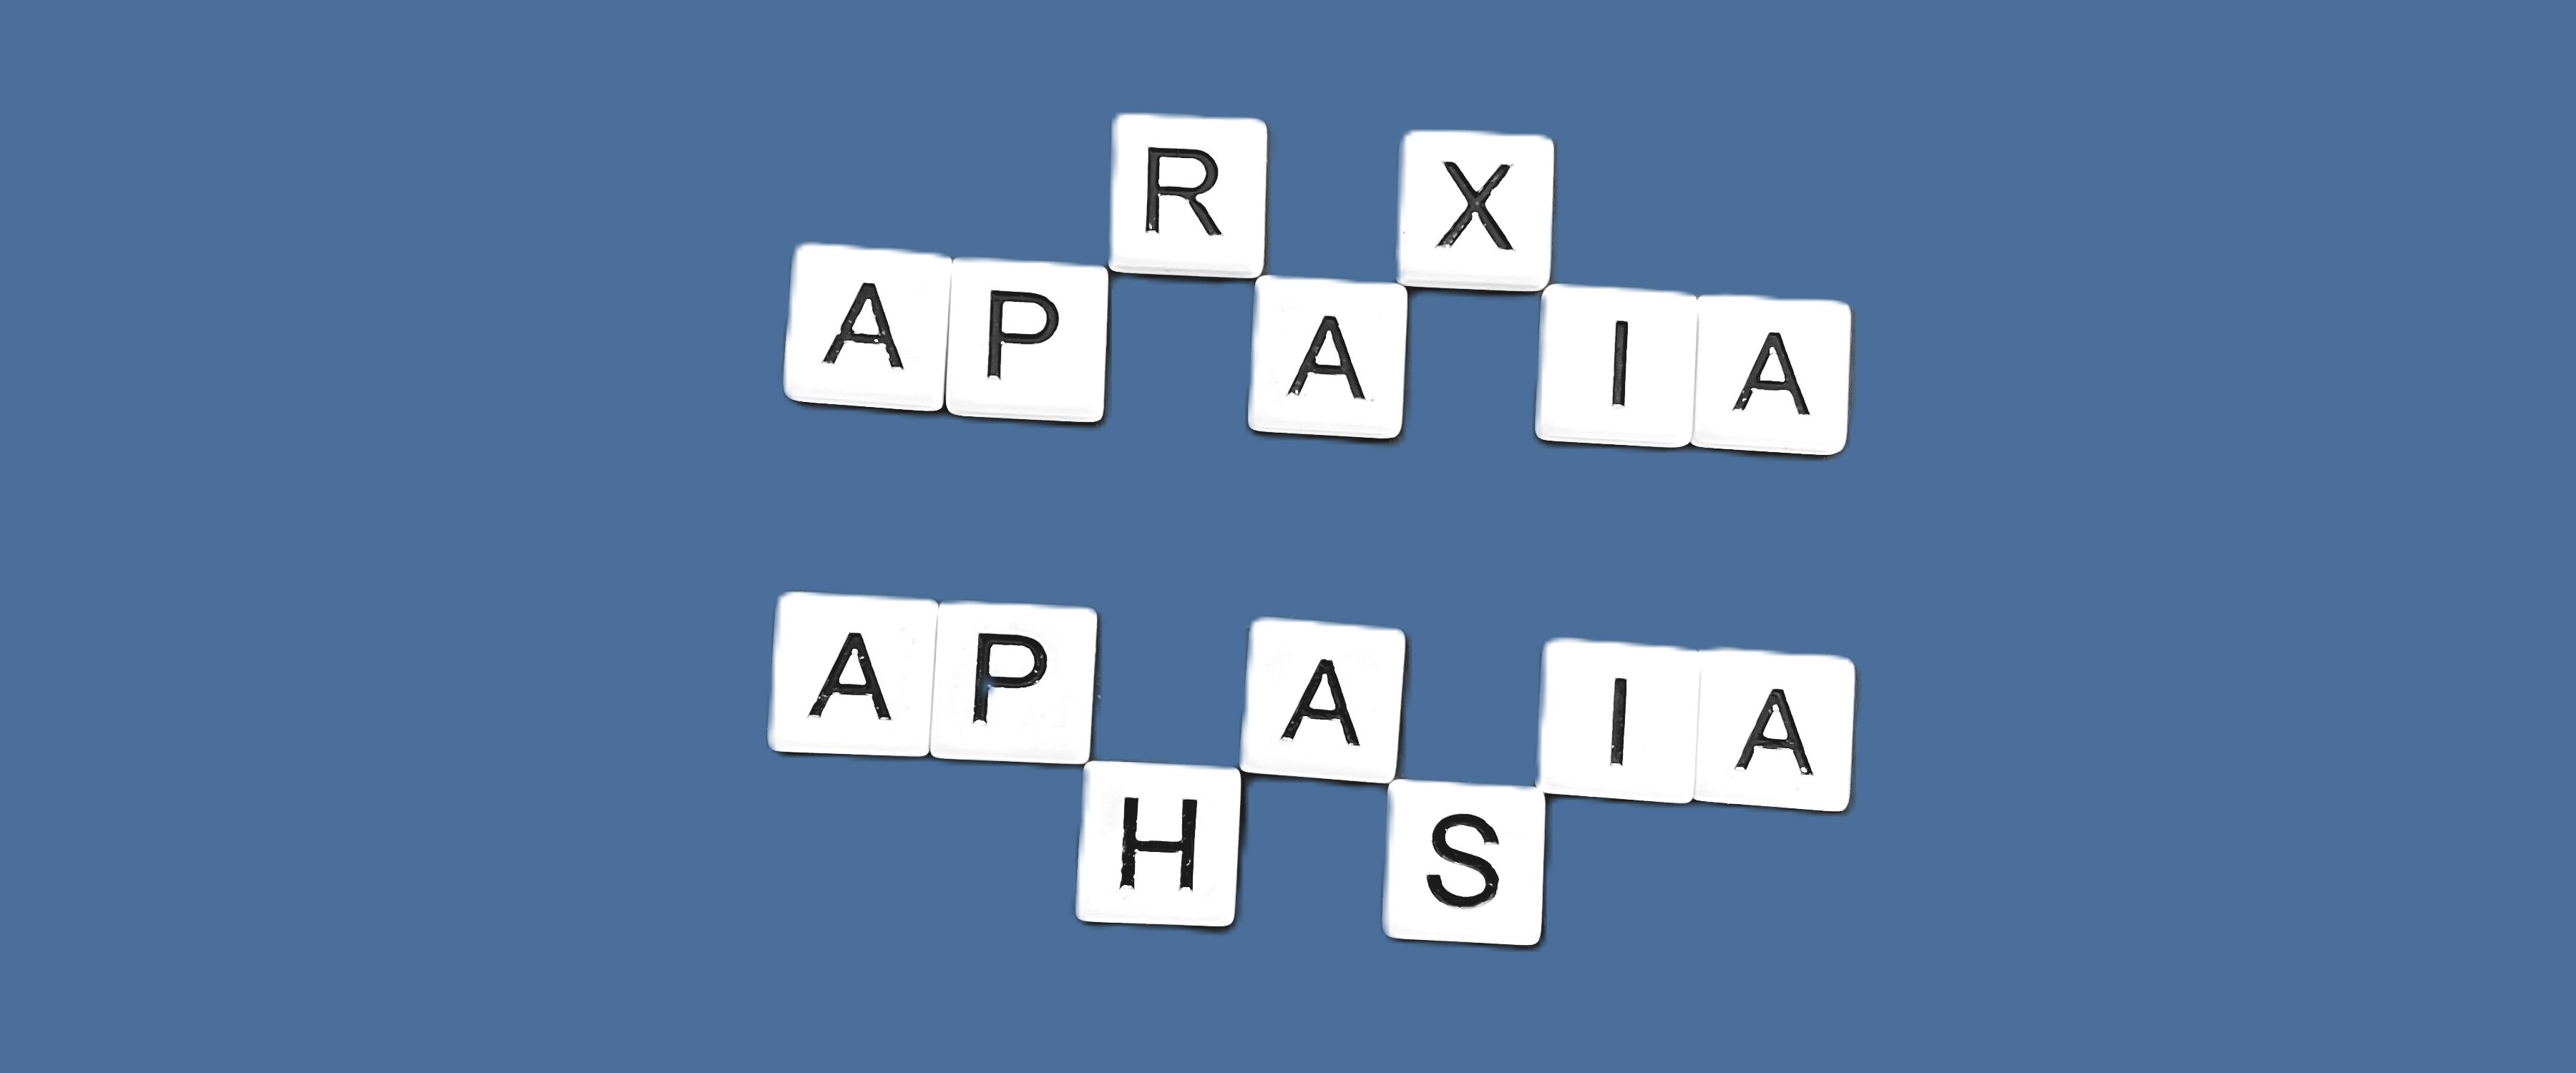 5 Things to Know about Aphasia and Apraxia